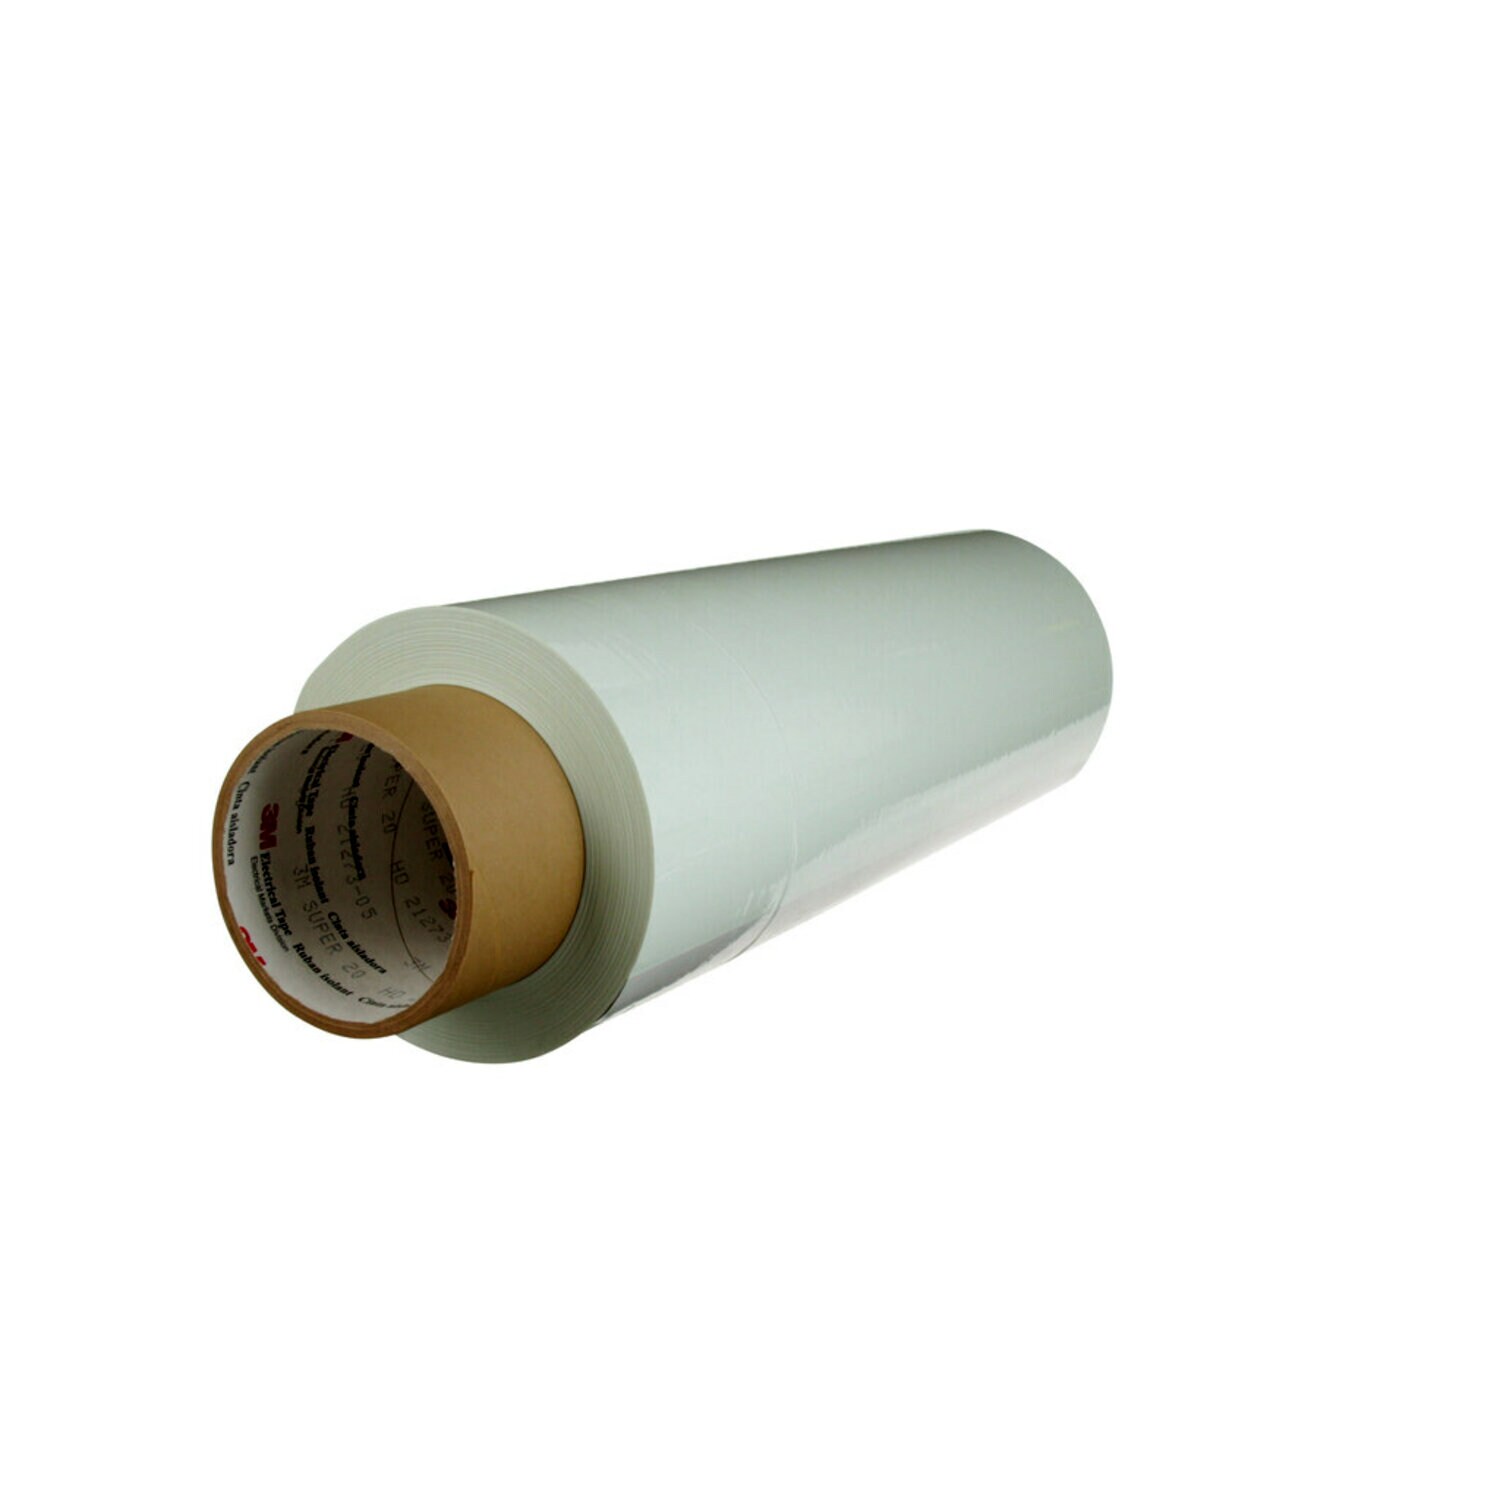 3M Scotchblok Masking Paper 06706, Gold Color, Polycoated Backing, Bleed  Through Resistant, 6 in x 750 ft